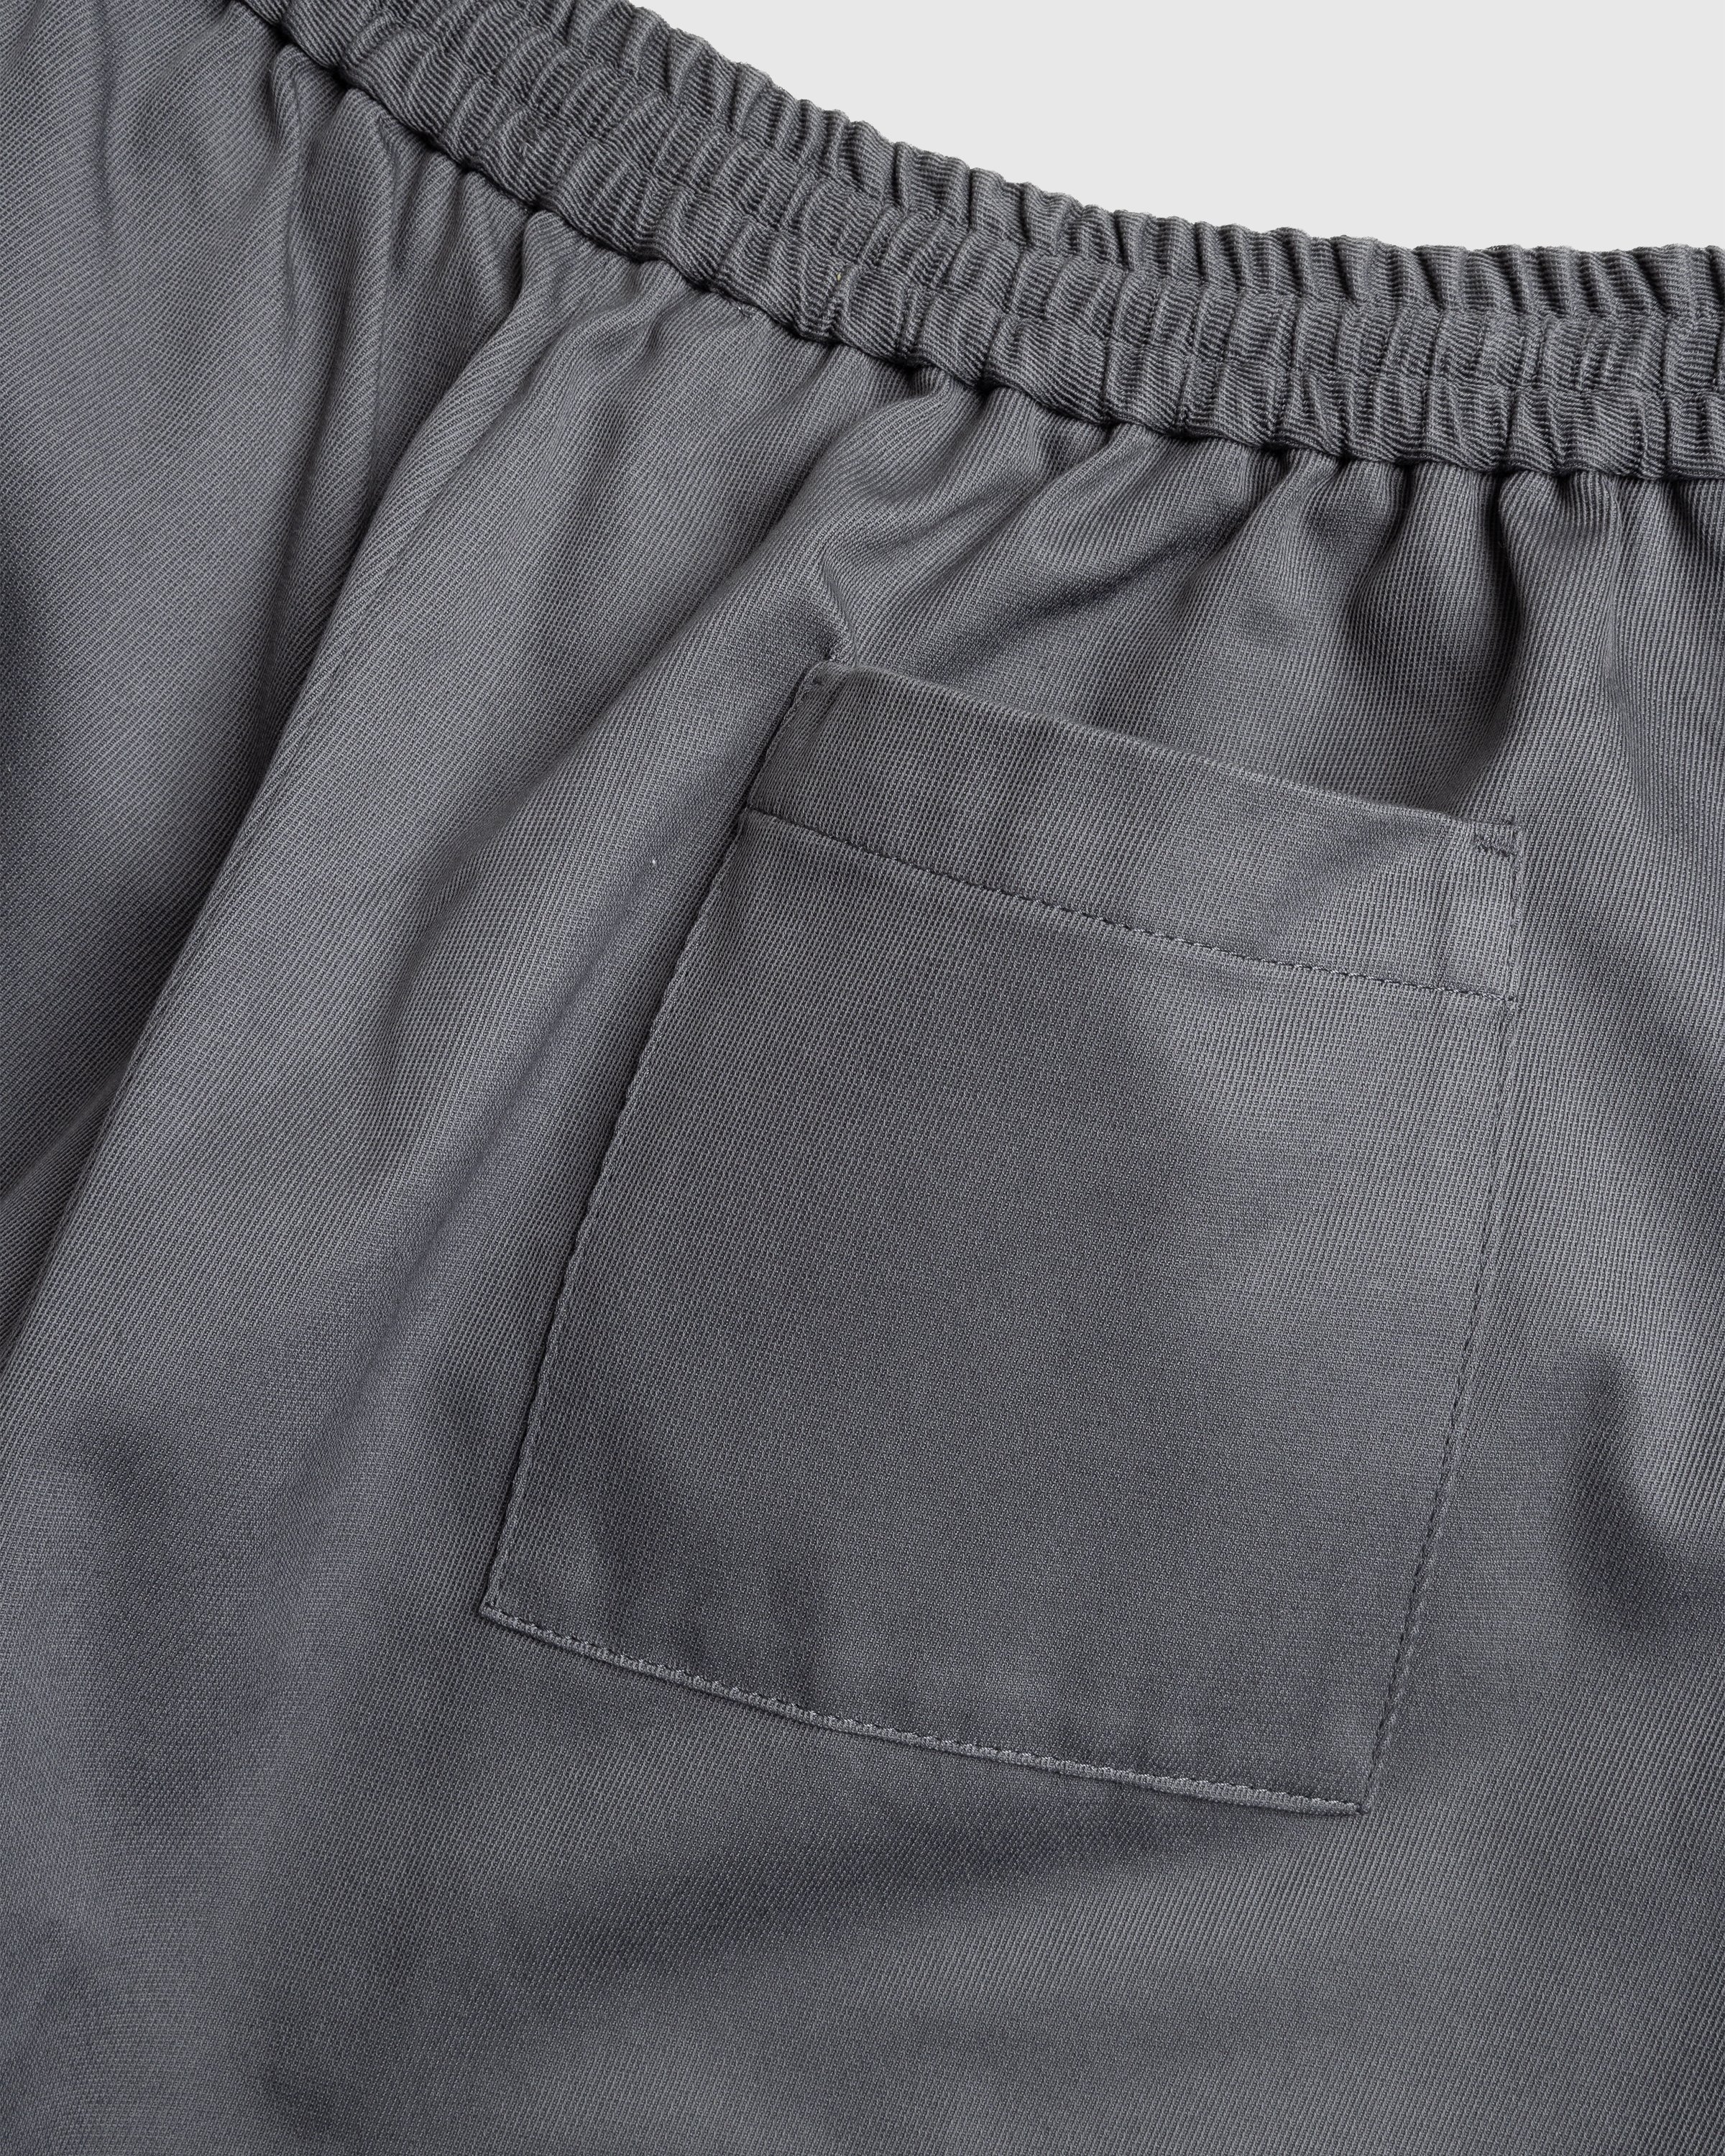 Acne Studios - Cotton Trousers Grey - Clothing - Grey - Image 5